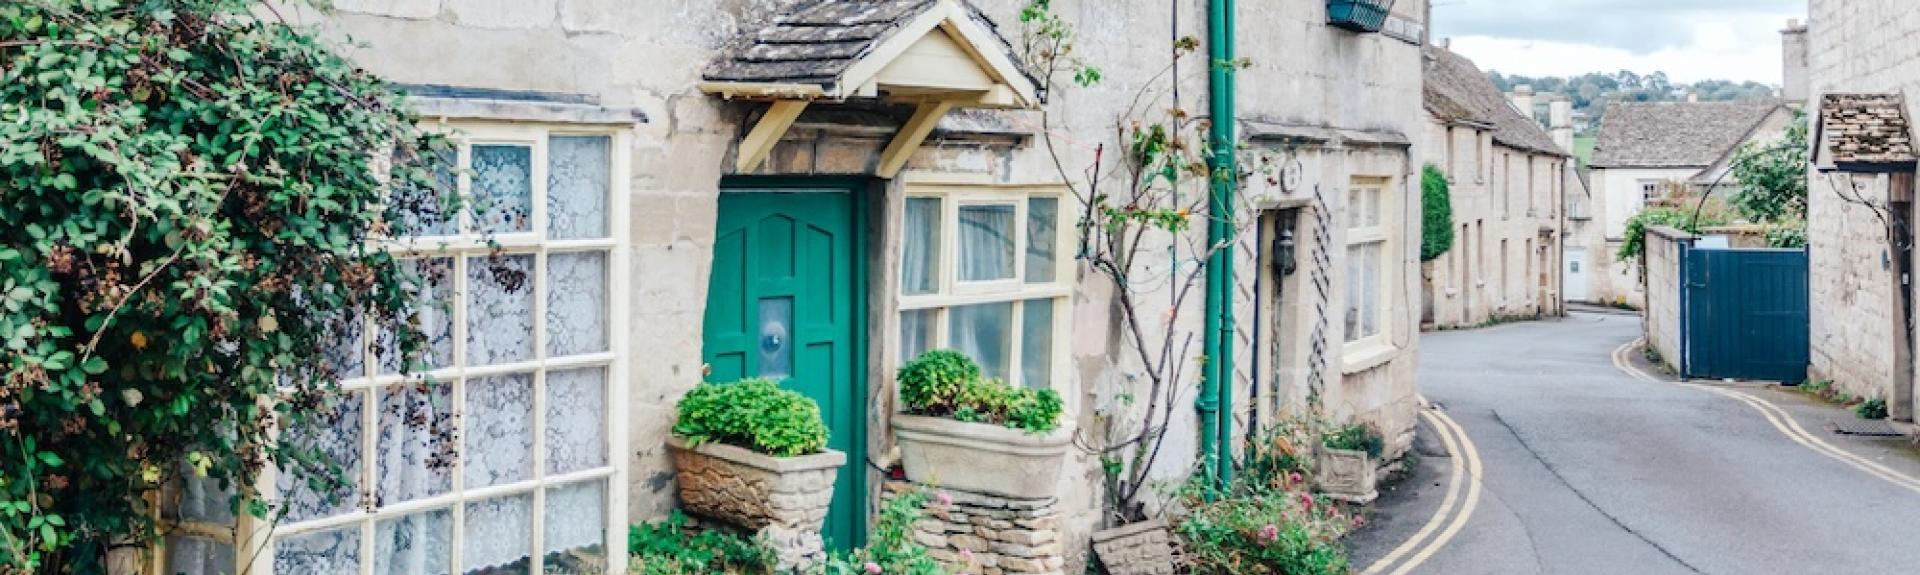 Exterior of a terraced Cotswold holiday cottage overlooking a village street.